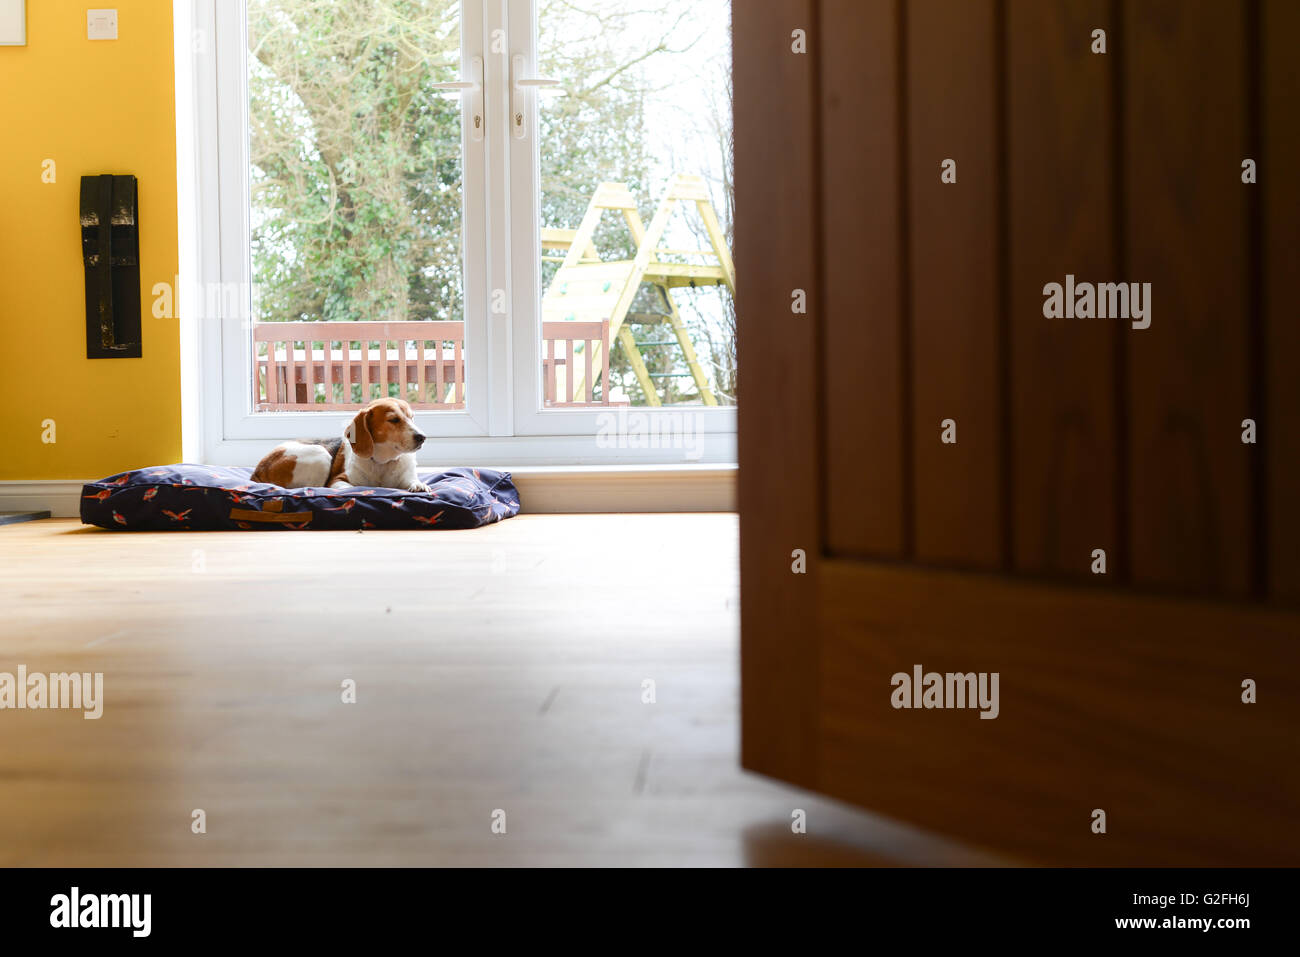 Small dog alone in room Stock Photo